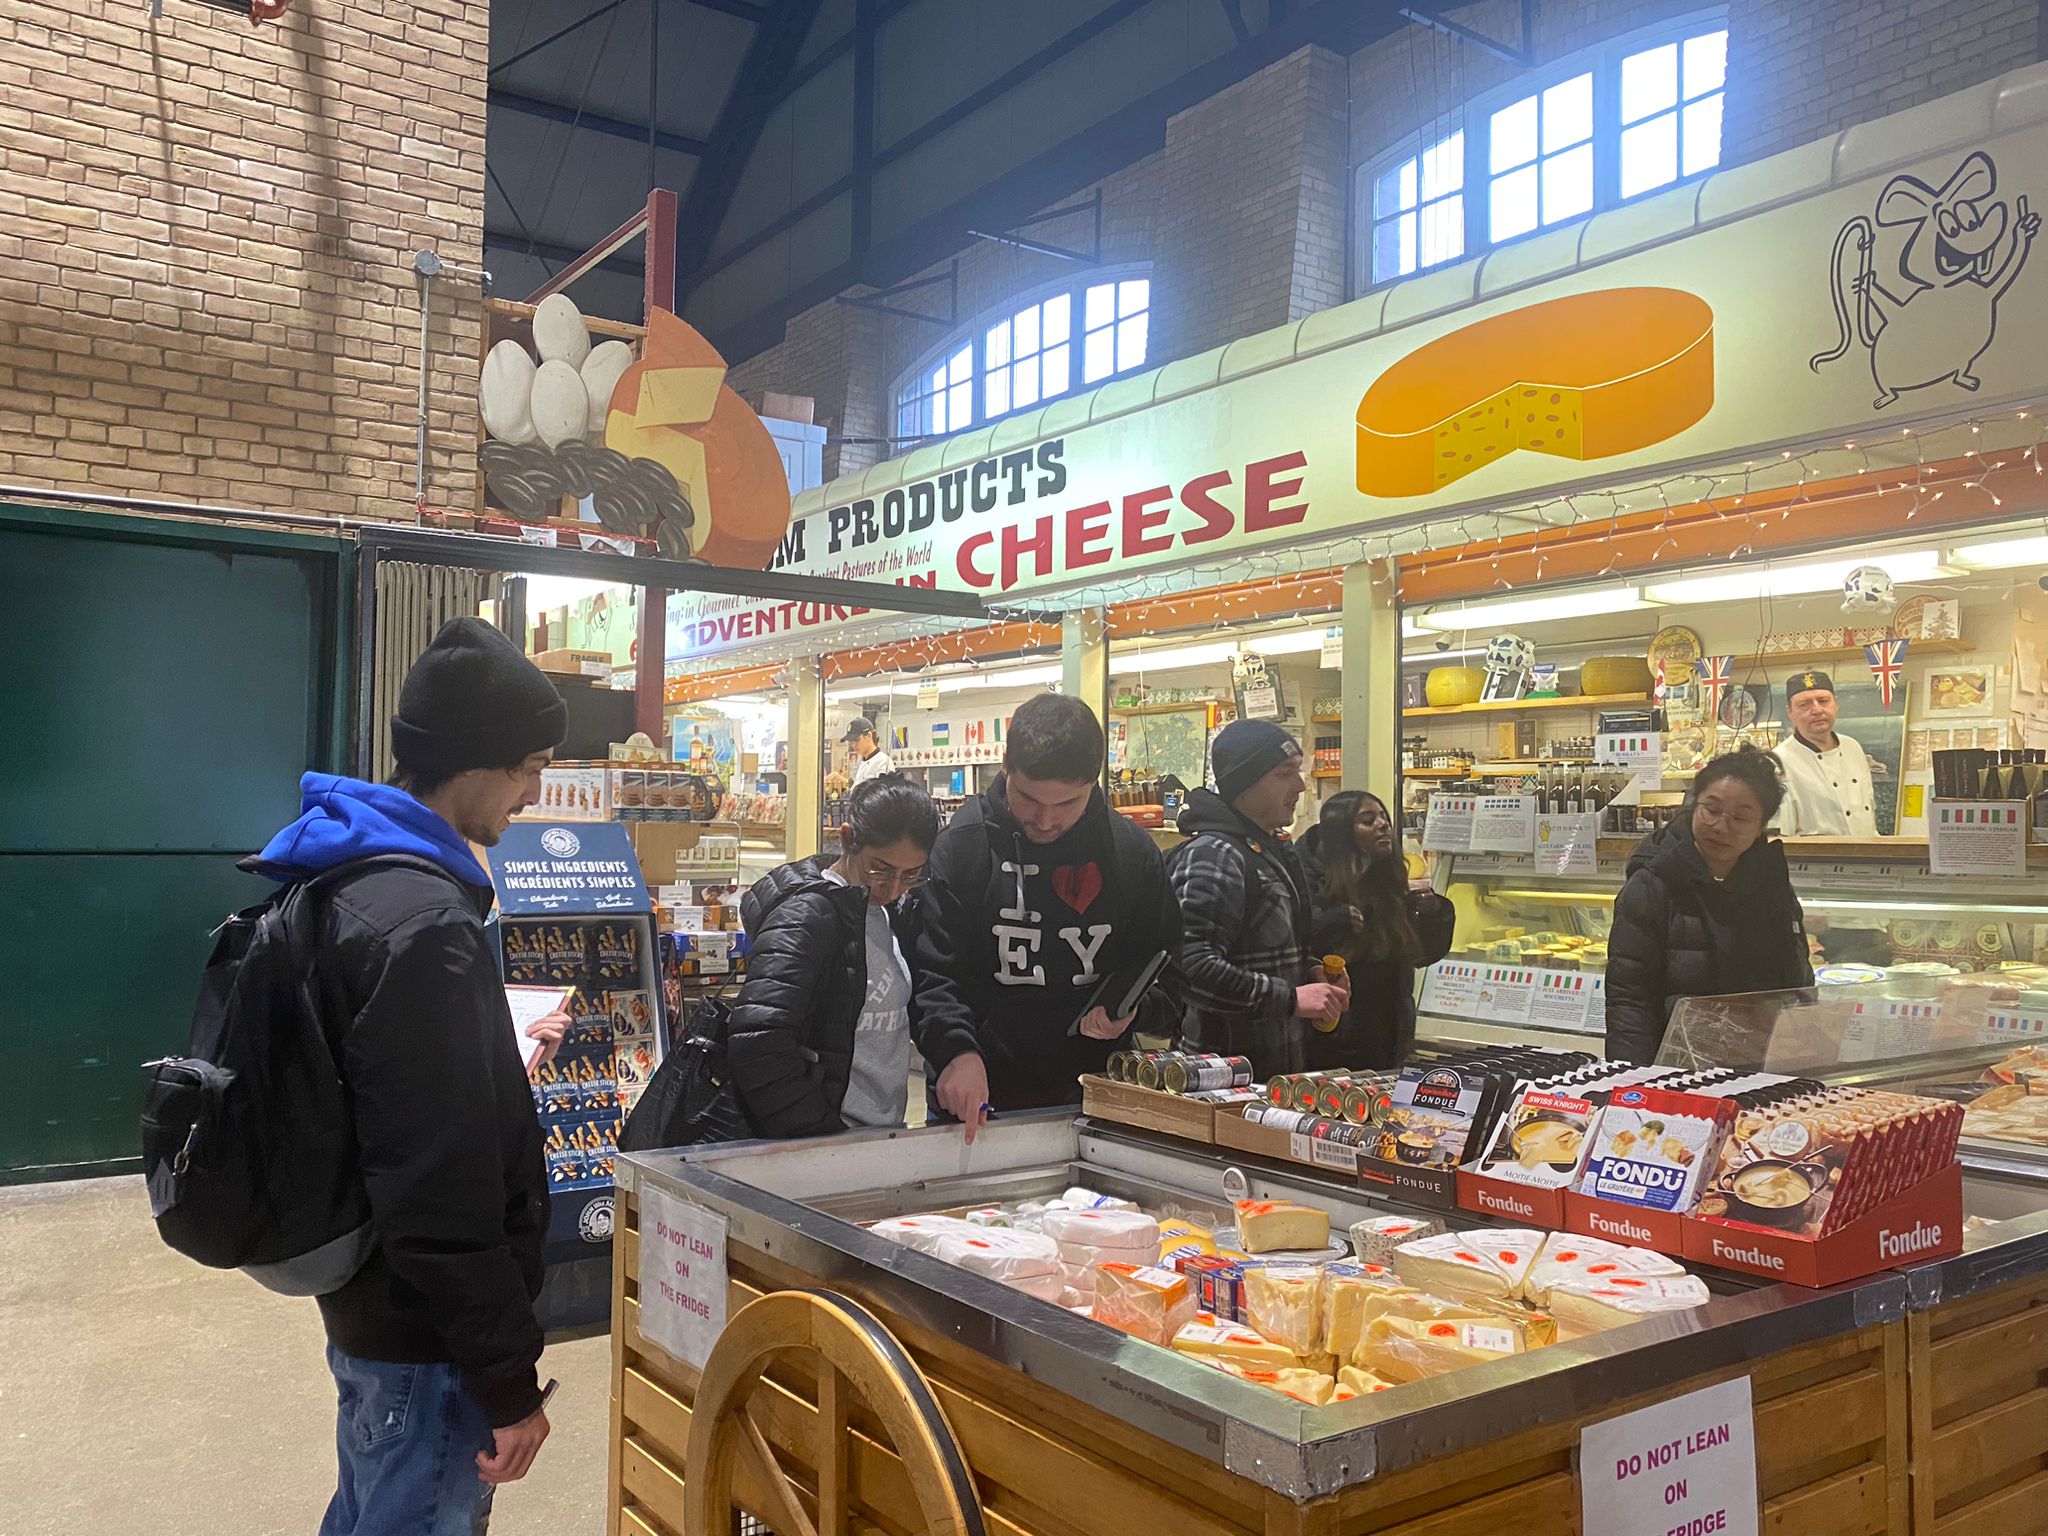 A group of students surround a cheese cart